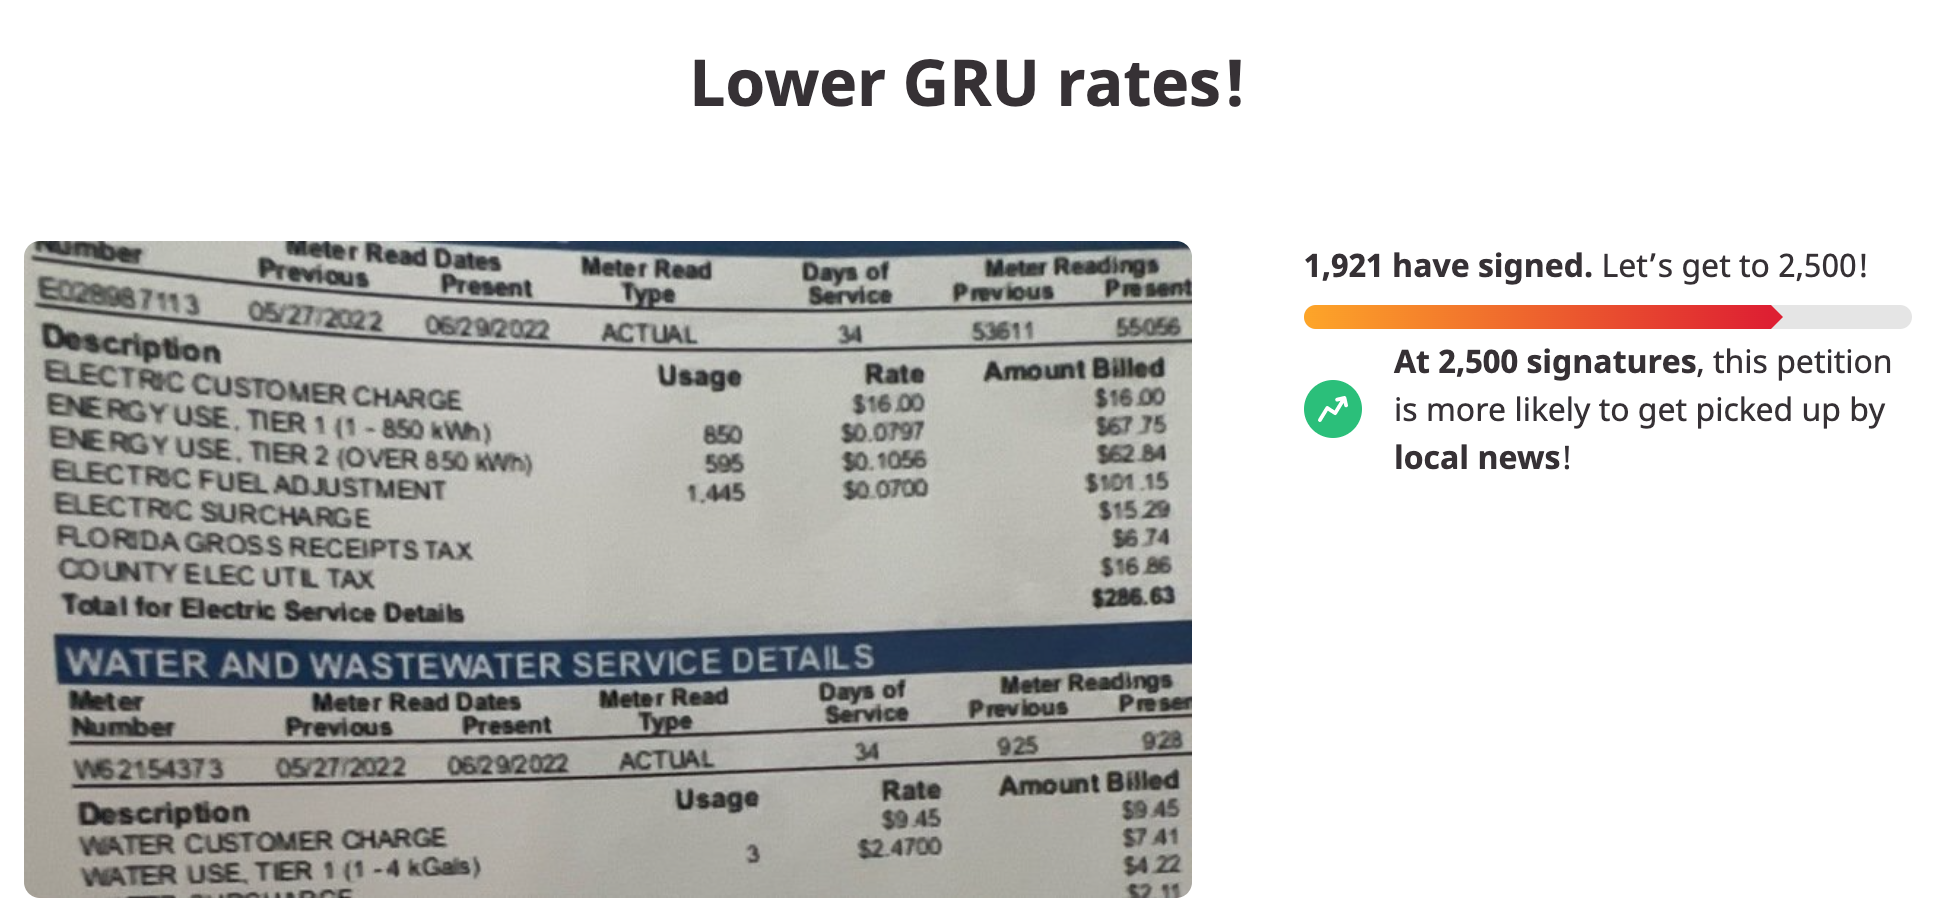 Petition for lower GRU rates attracts nearly 2,000 signatures Alachua